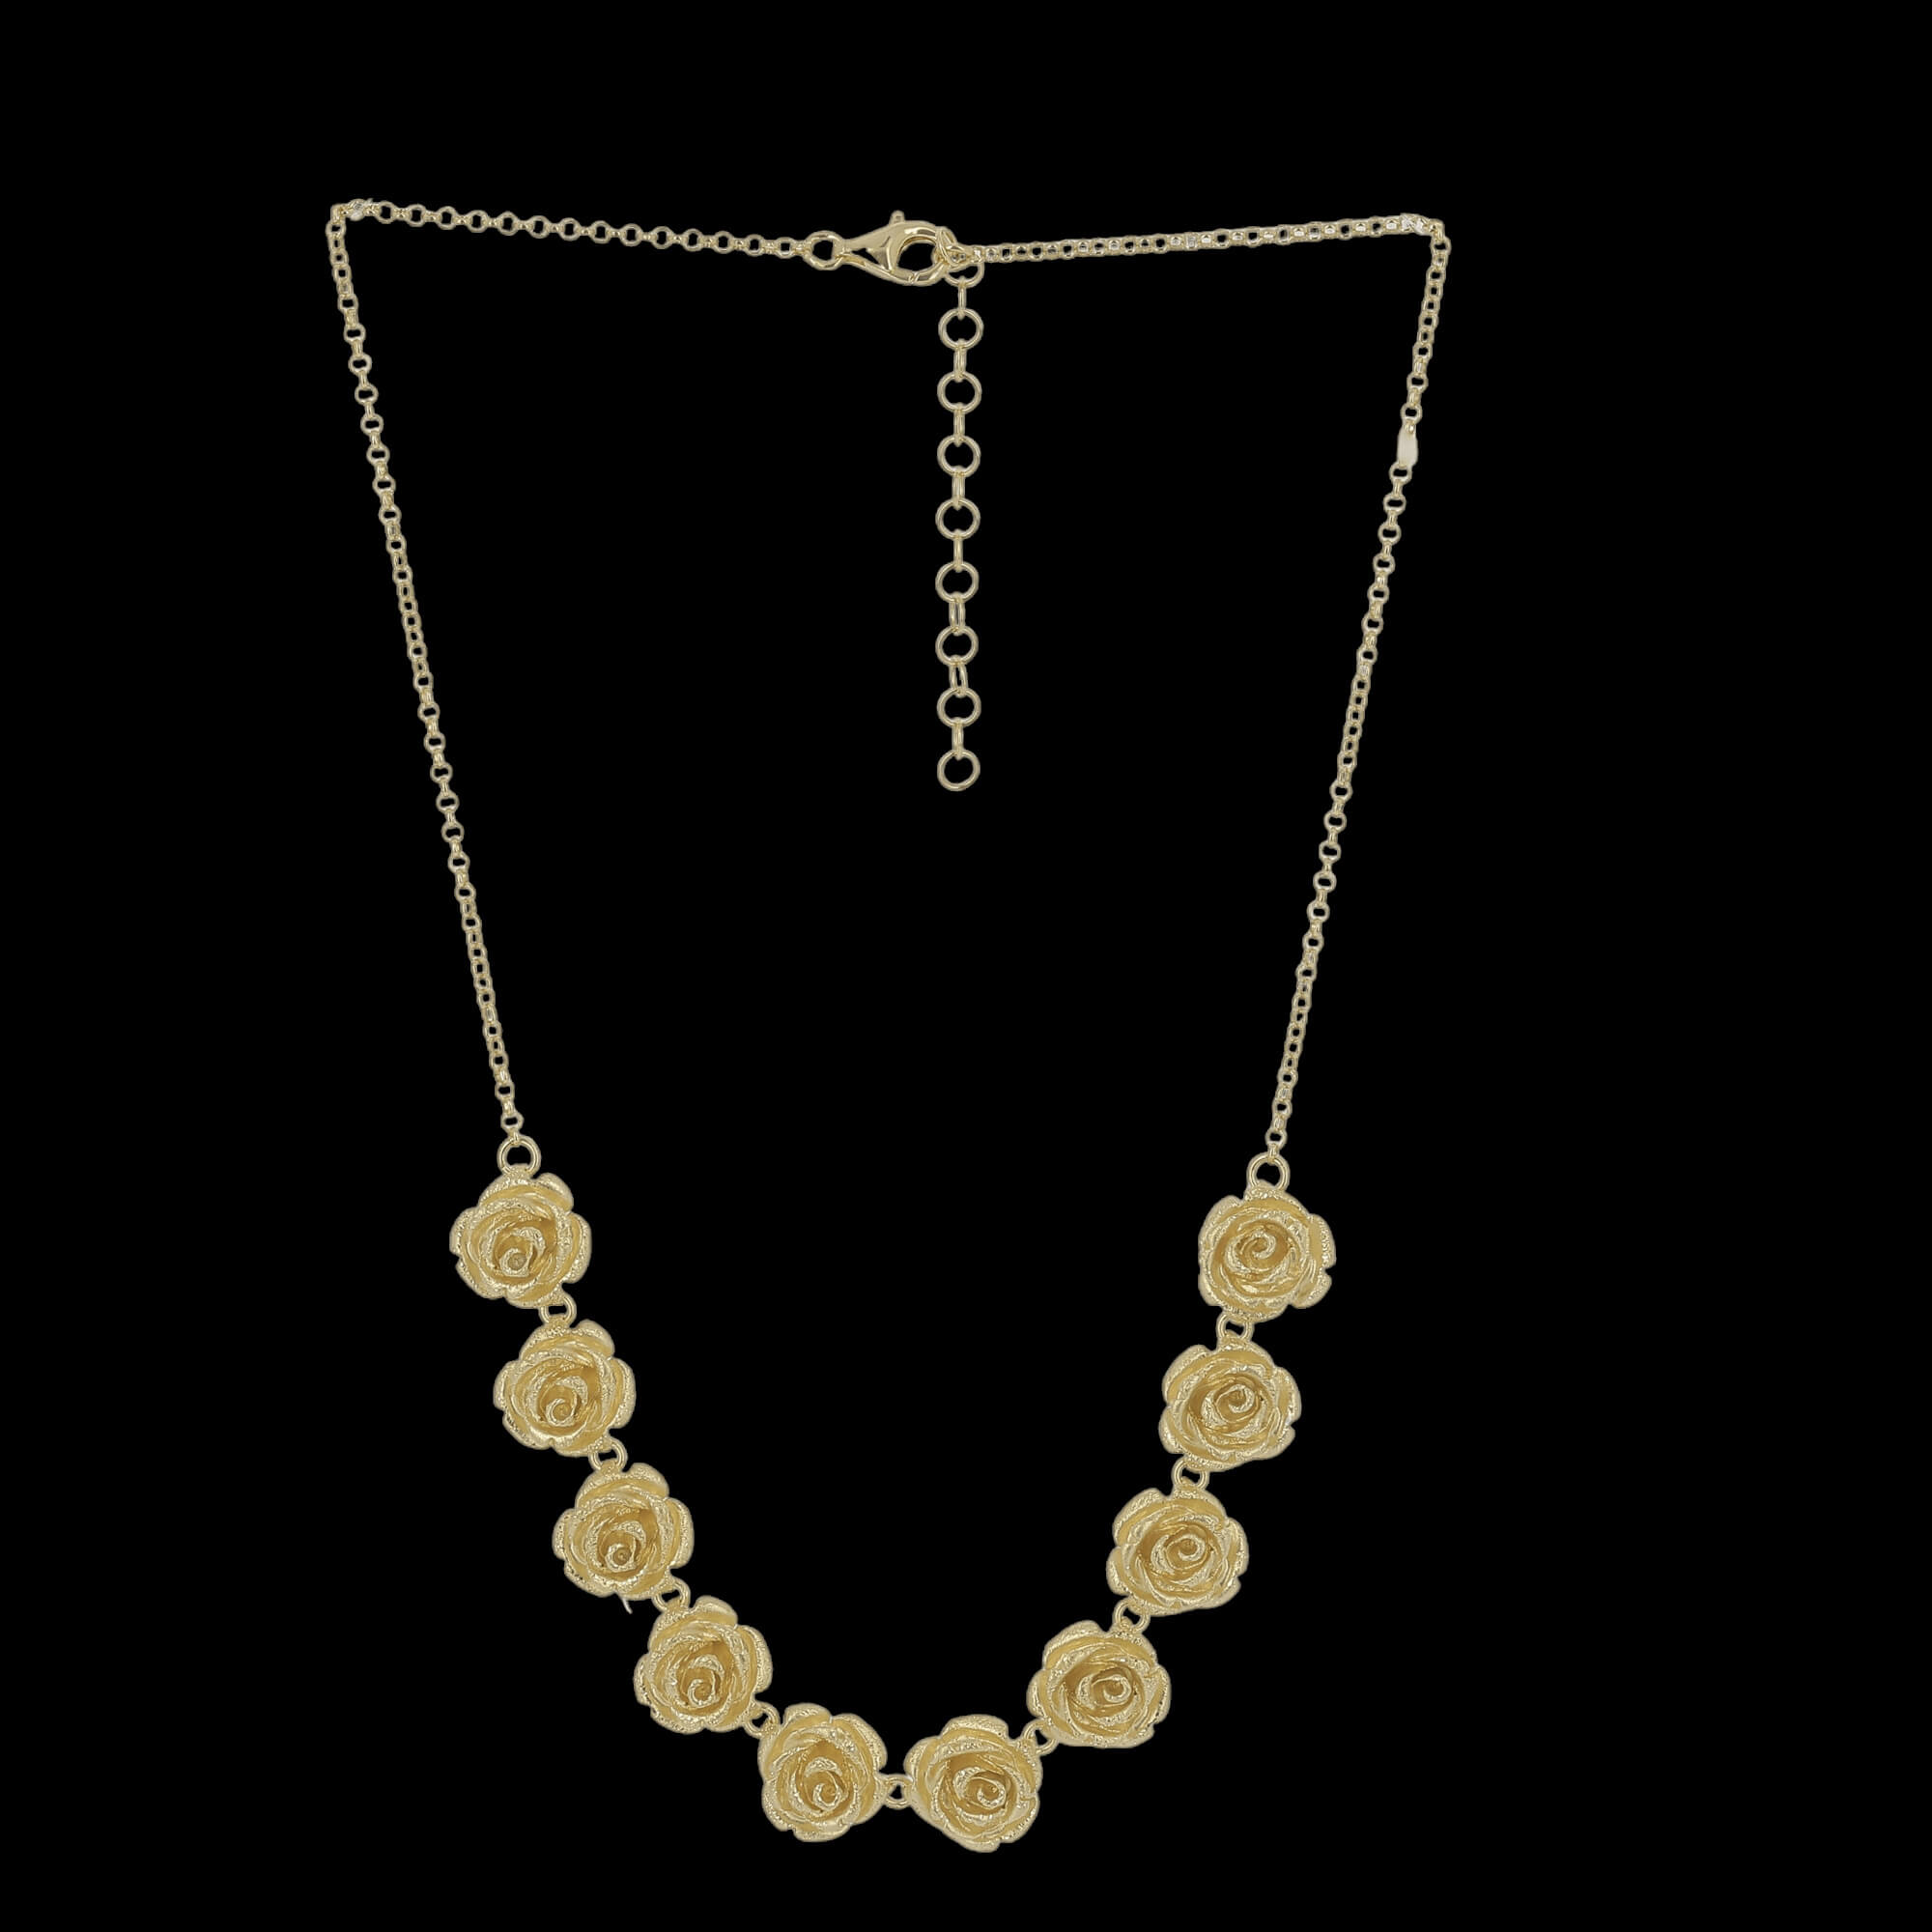 Gilded flowers necklace